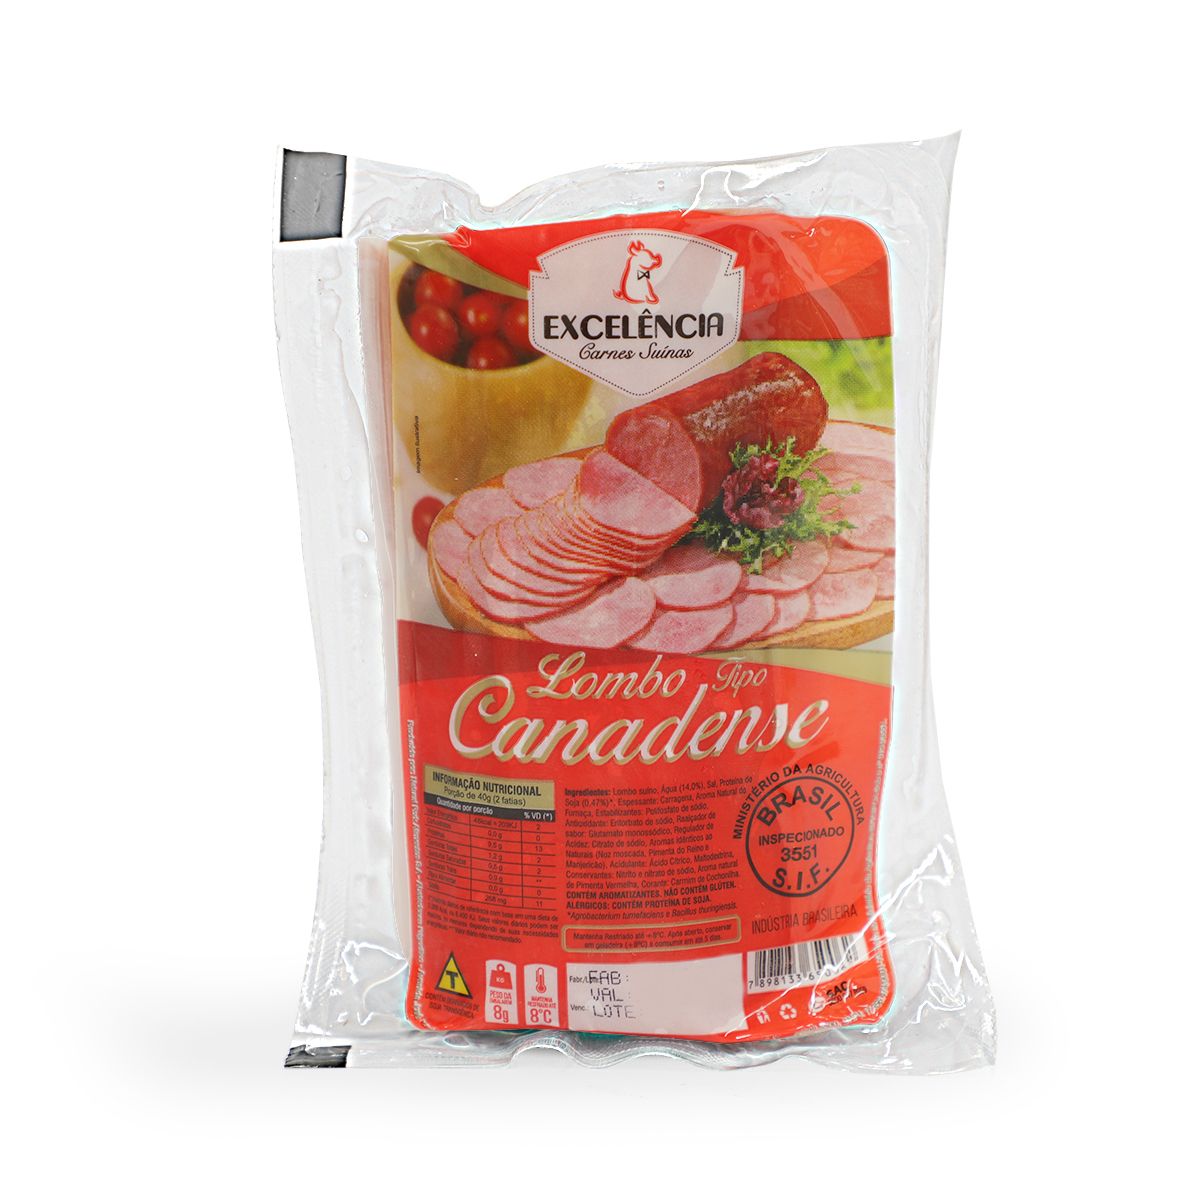 Lombo Canadense Excelência 1 Unid. Aprox.530g